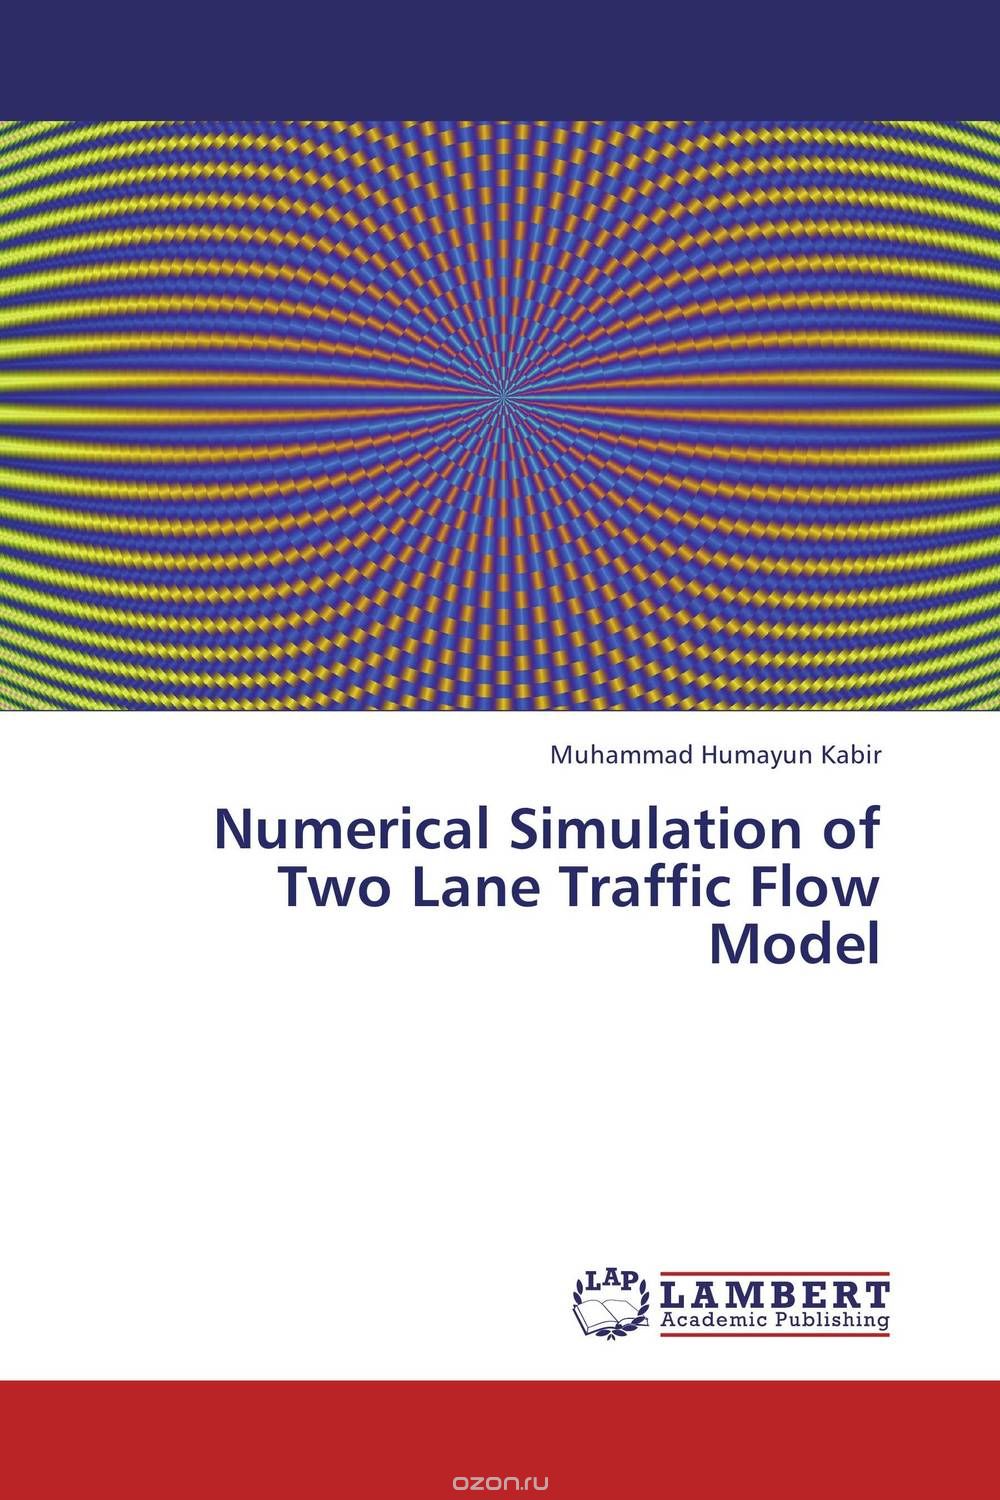 Numerical Simulation of Two Lane Traffic Flow Model